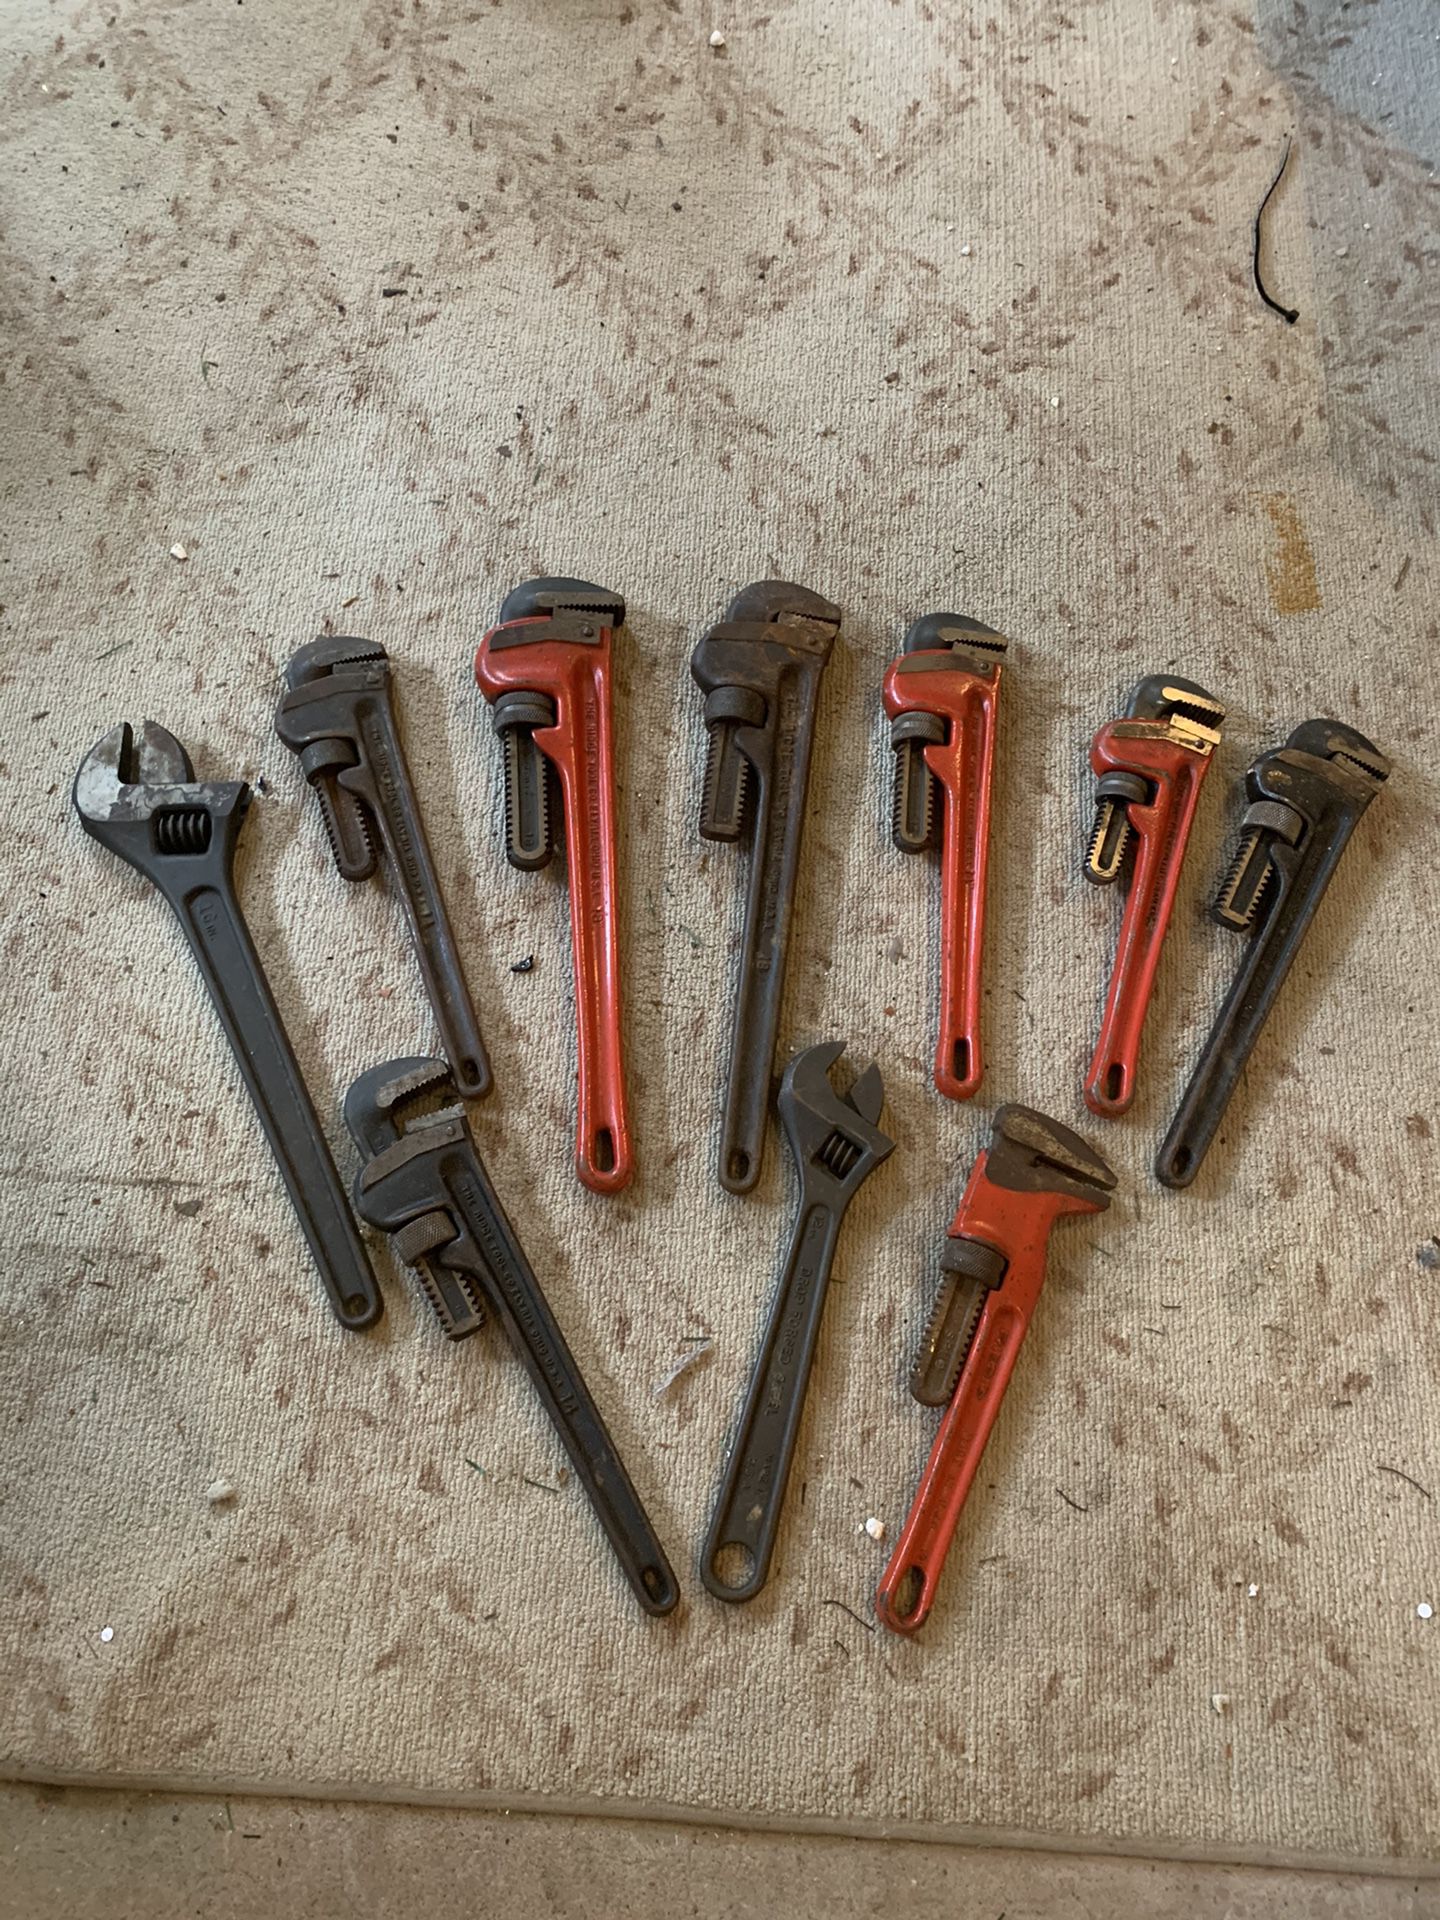 10 plumbers wrenches